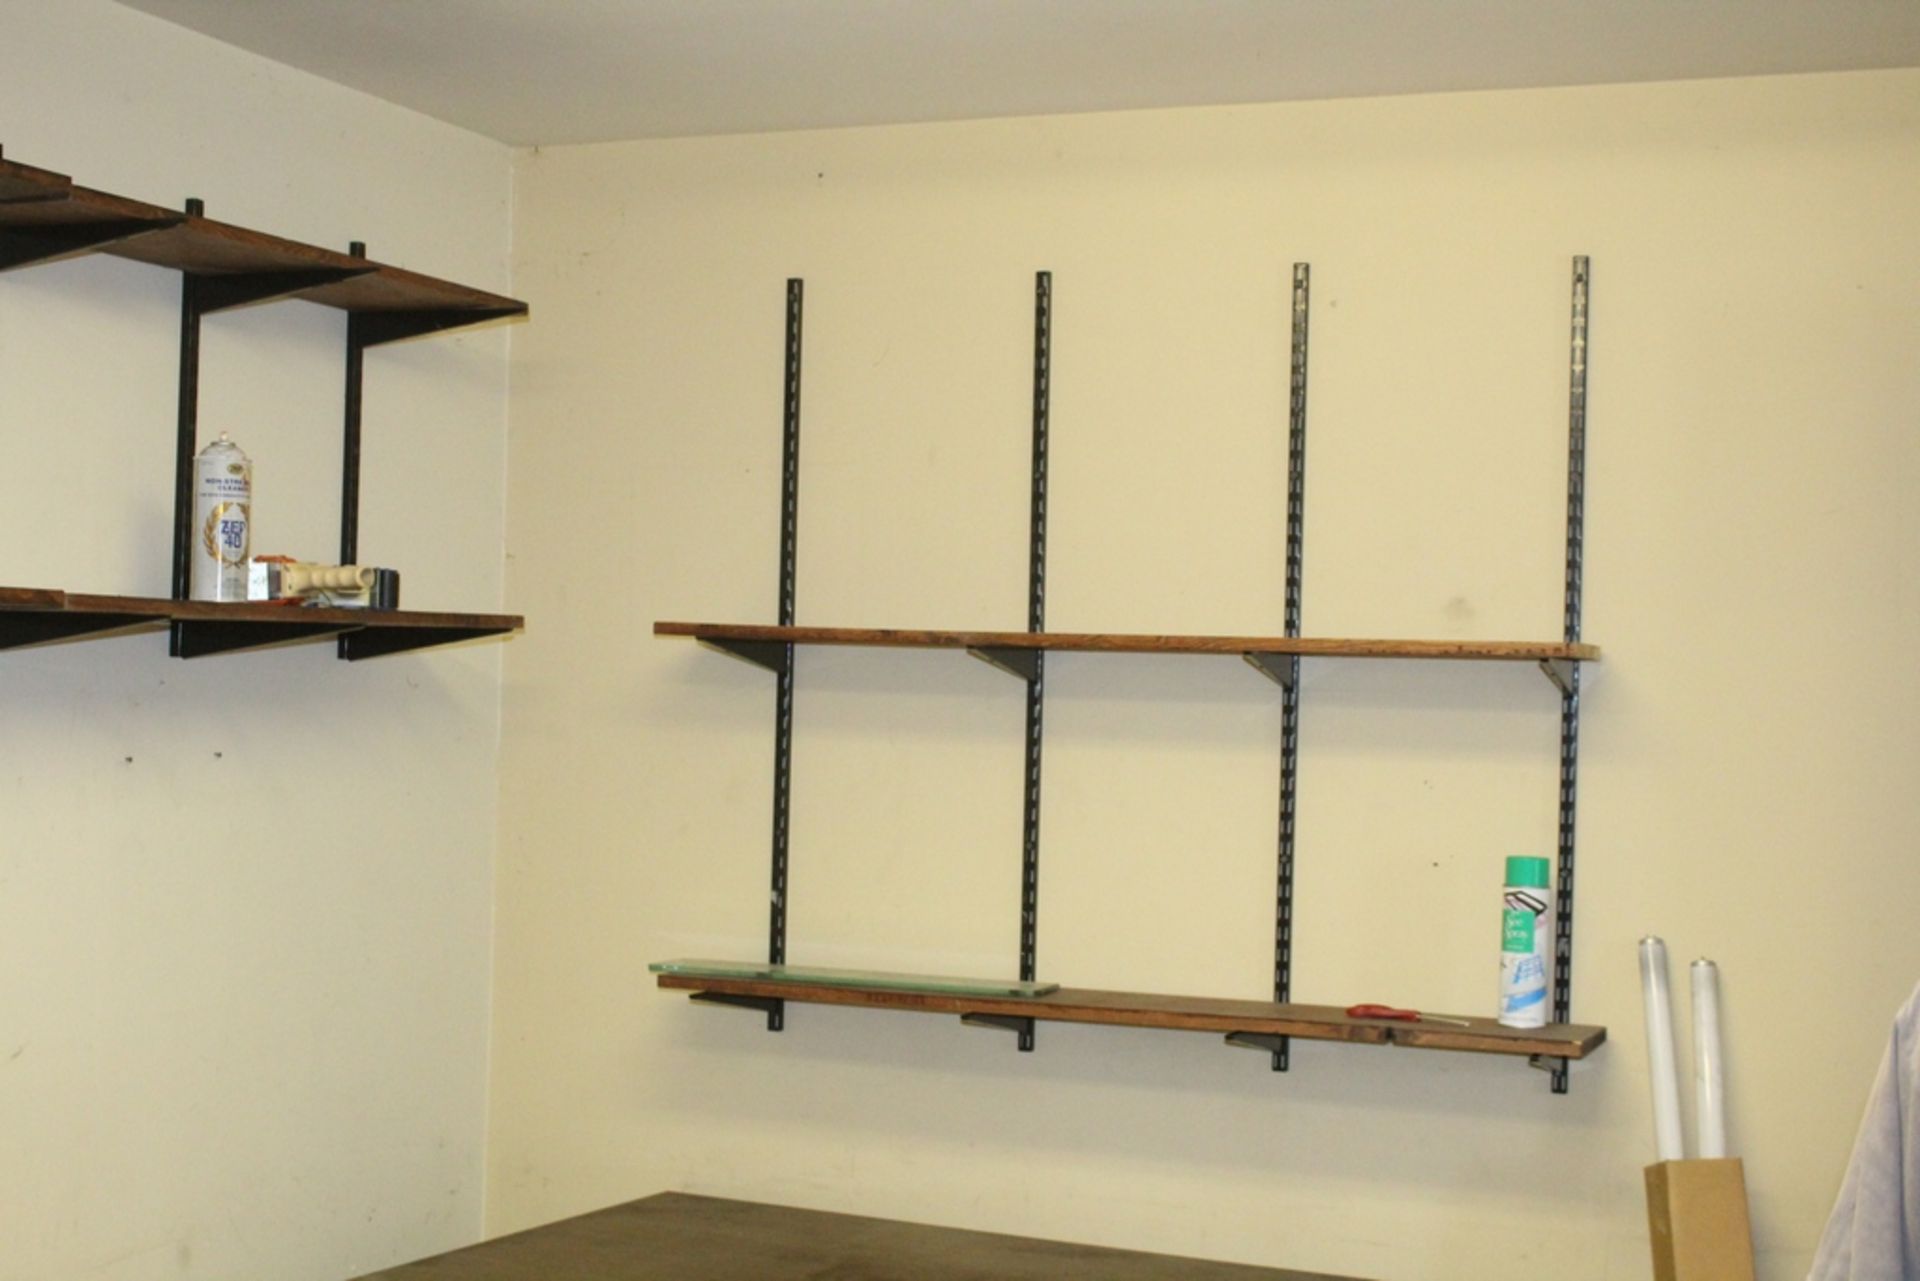 ASSORTED SHELVES ON WALL - Image 2 of 2